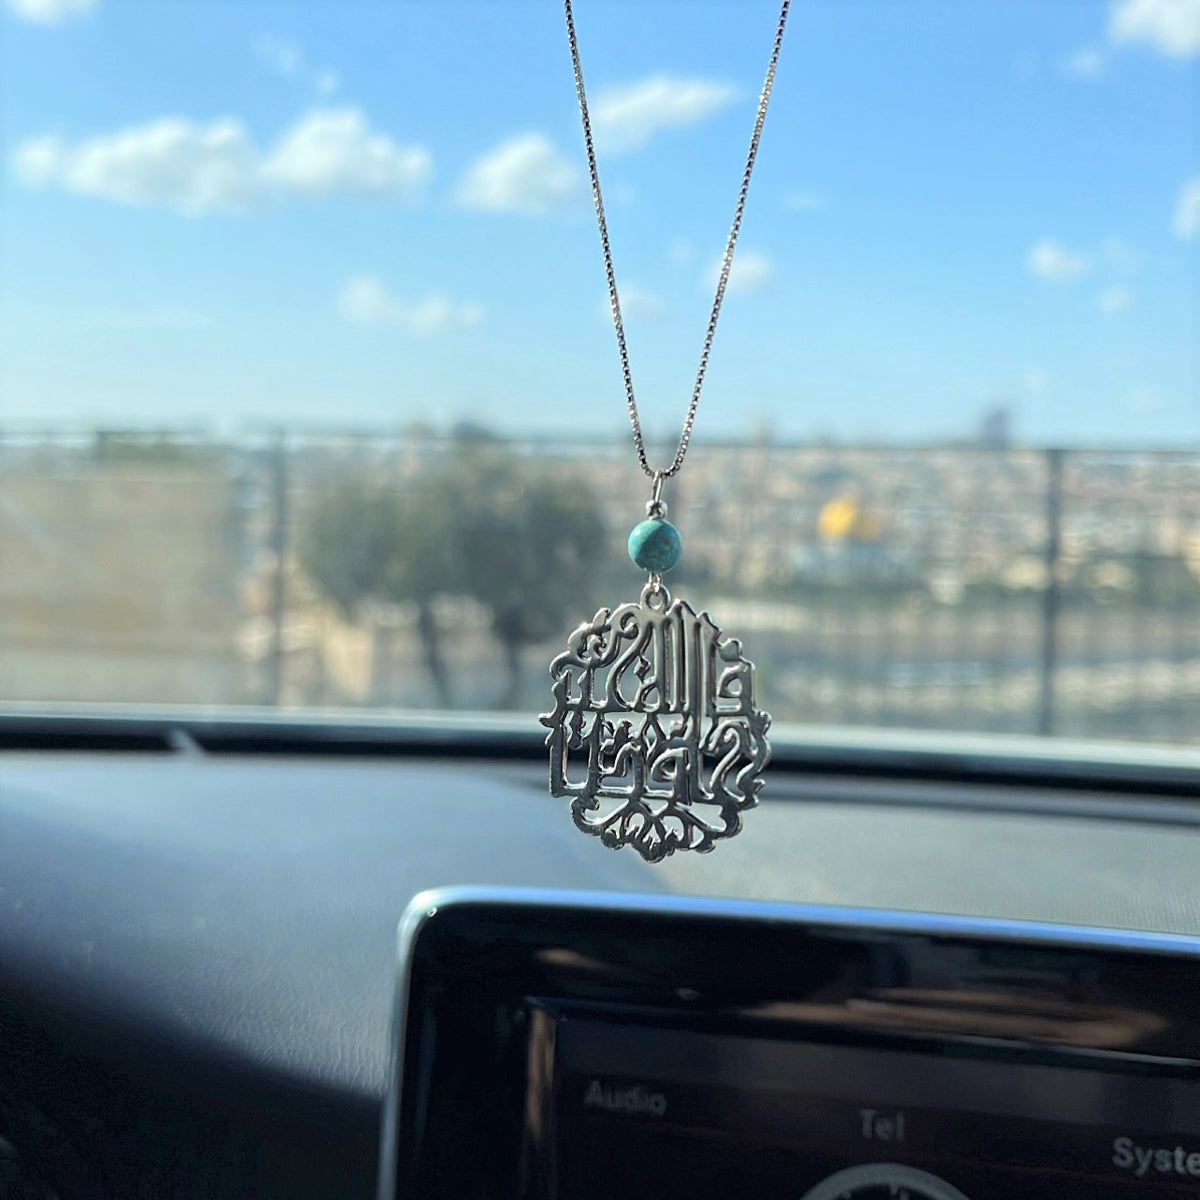 Car mirror chain with a verse from "سورة يوسف" with turquoise stone